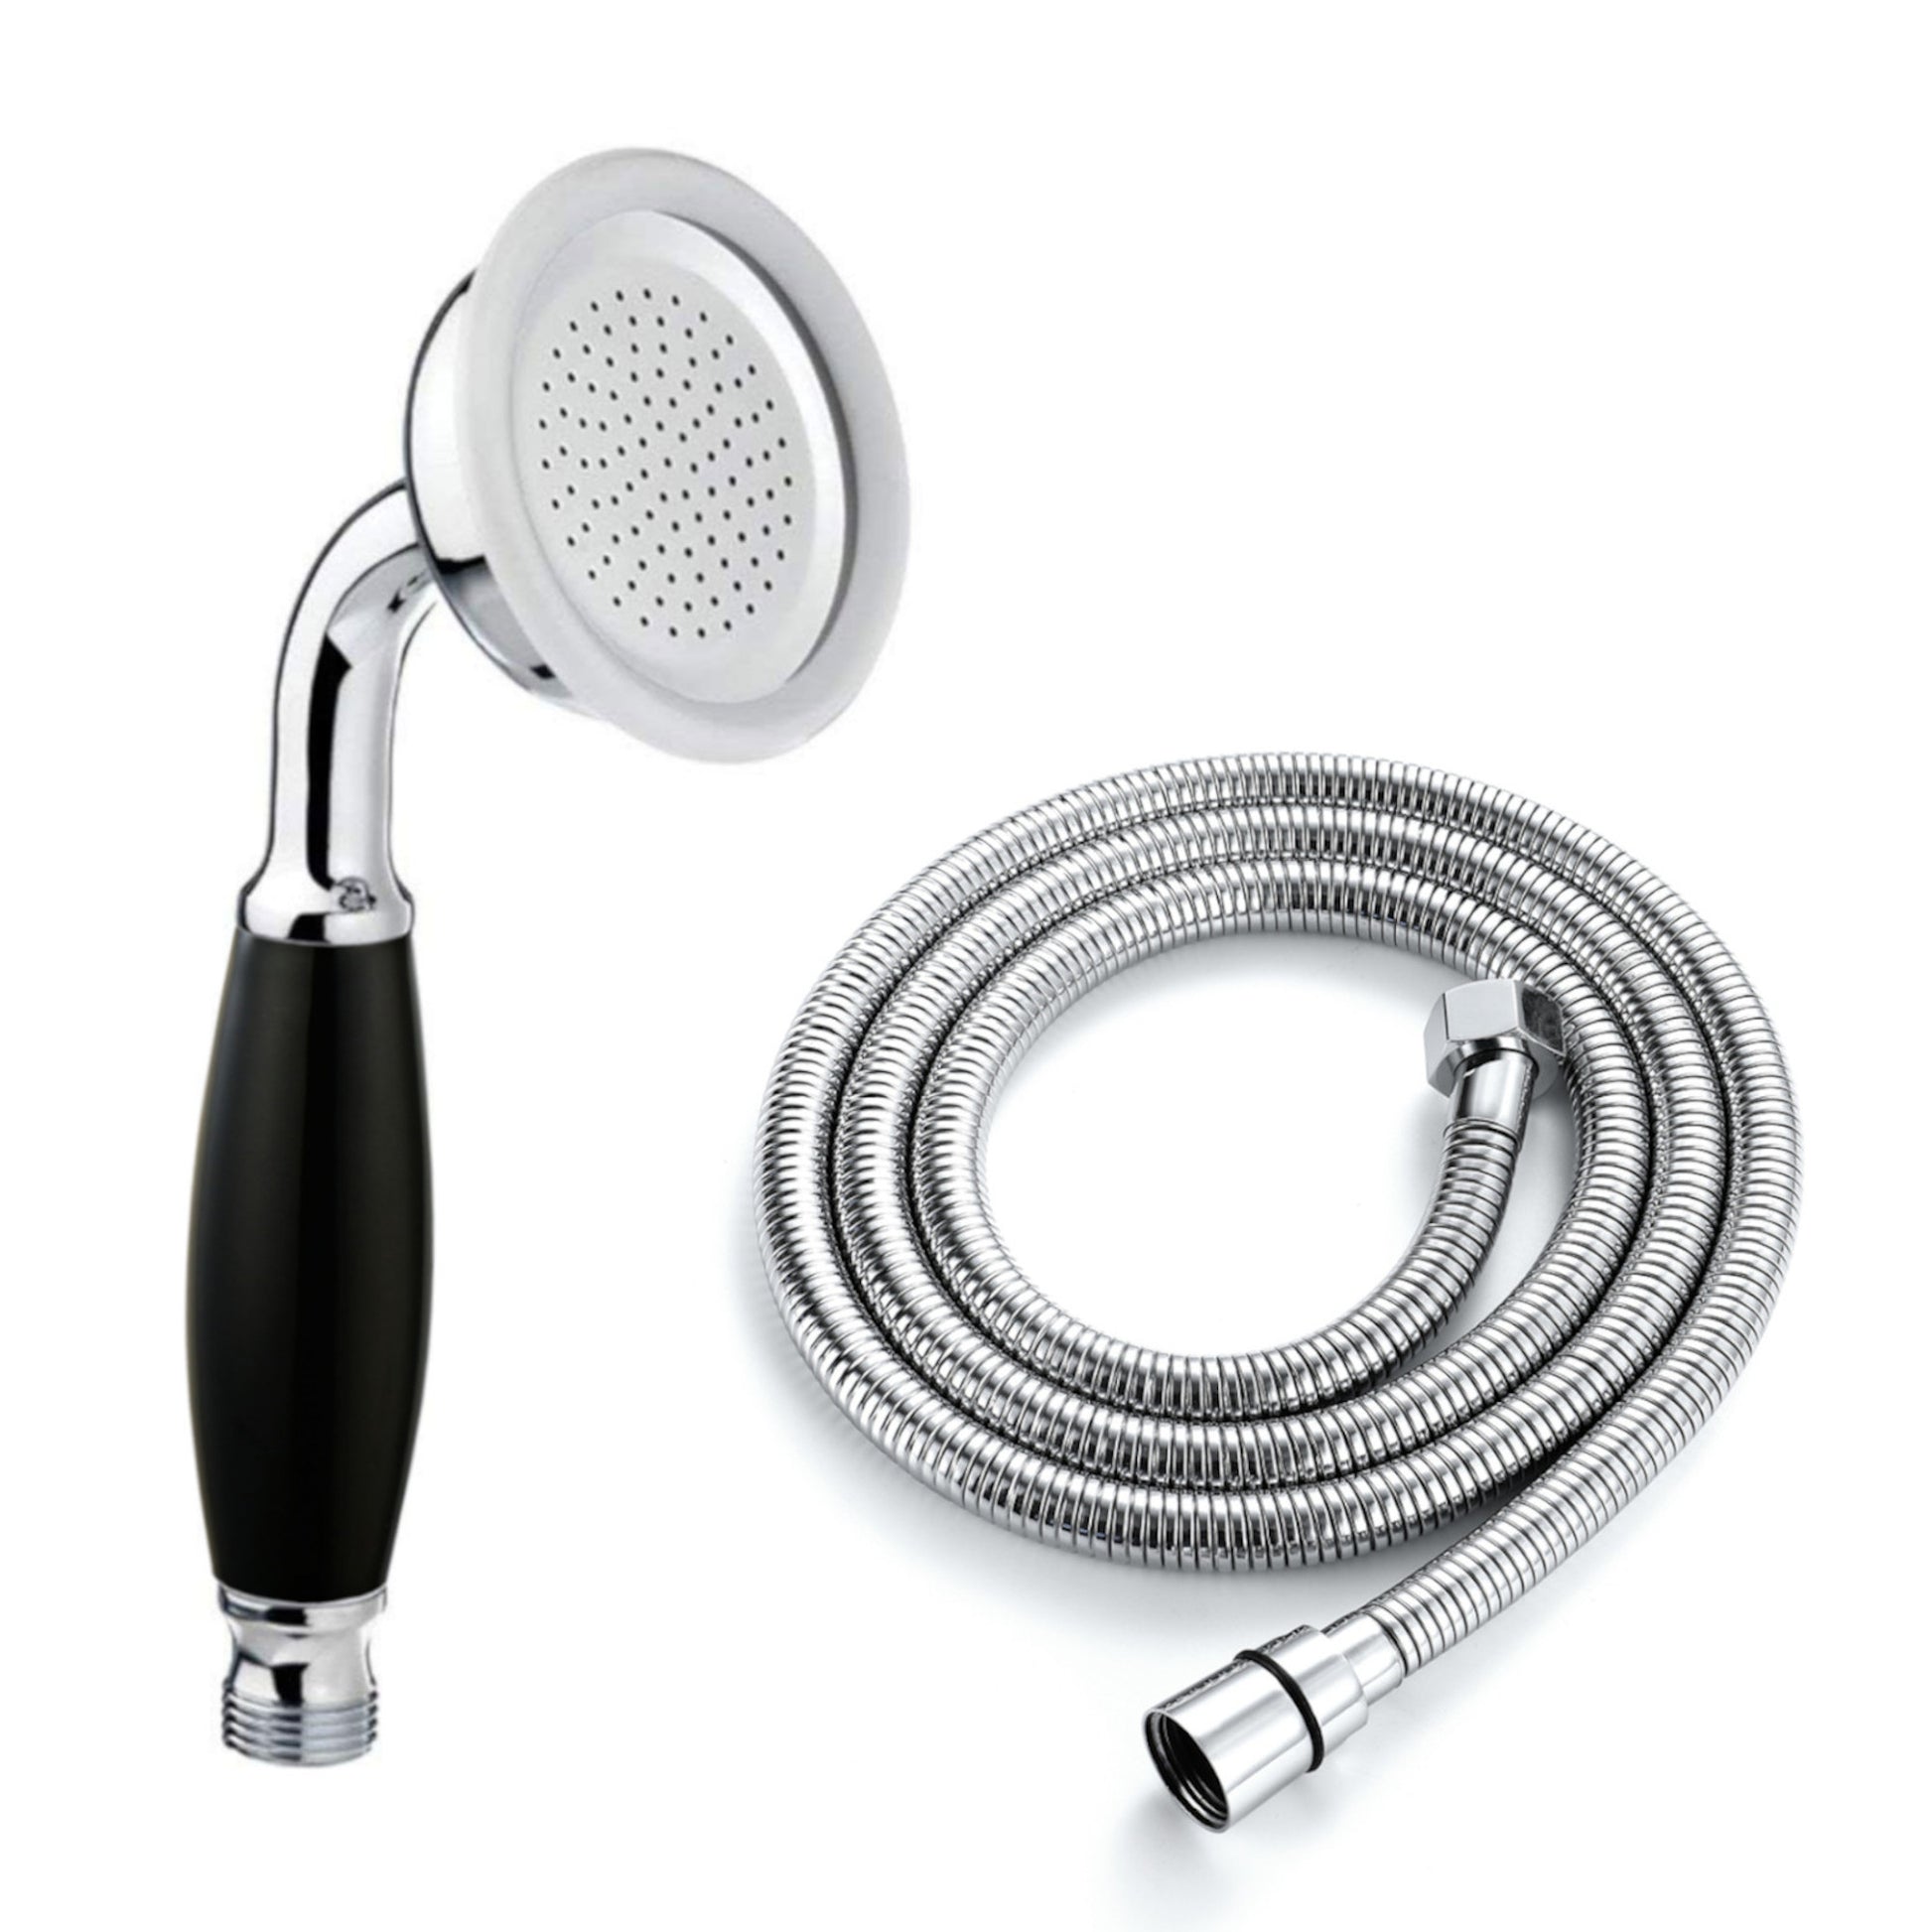 Traditional Handheld Shower Head and Hose Kit Brass with Black Ceramic Details - Chrome - Showers